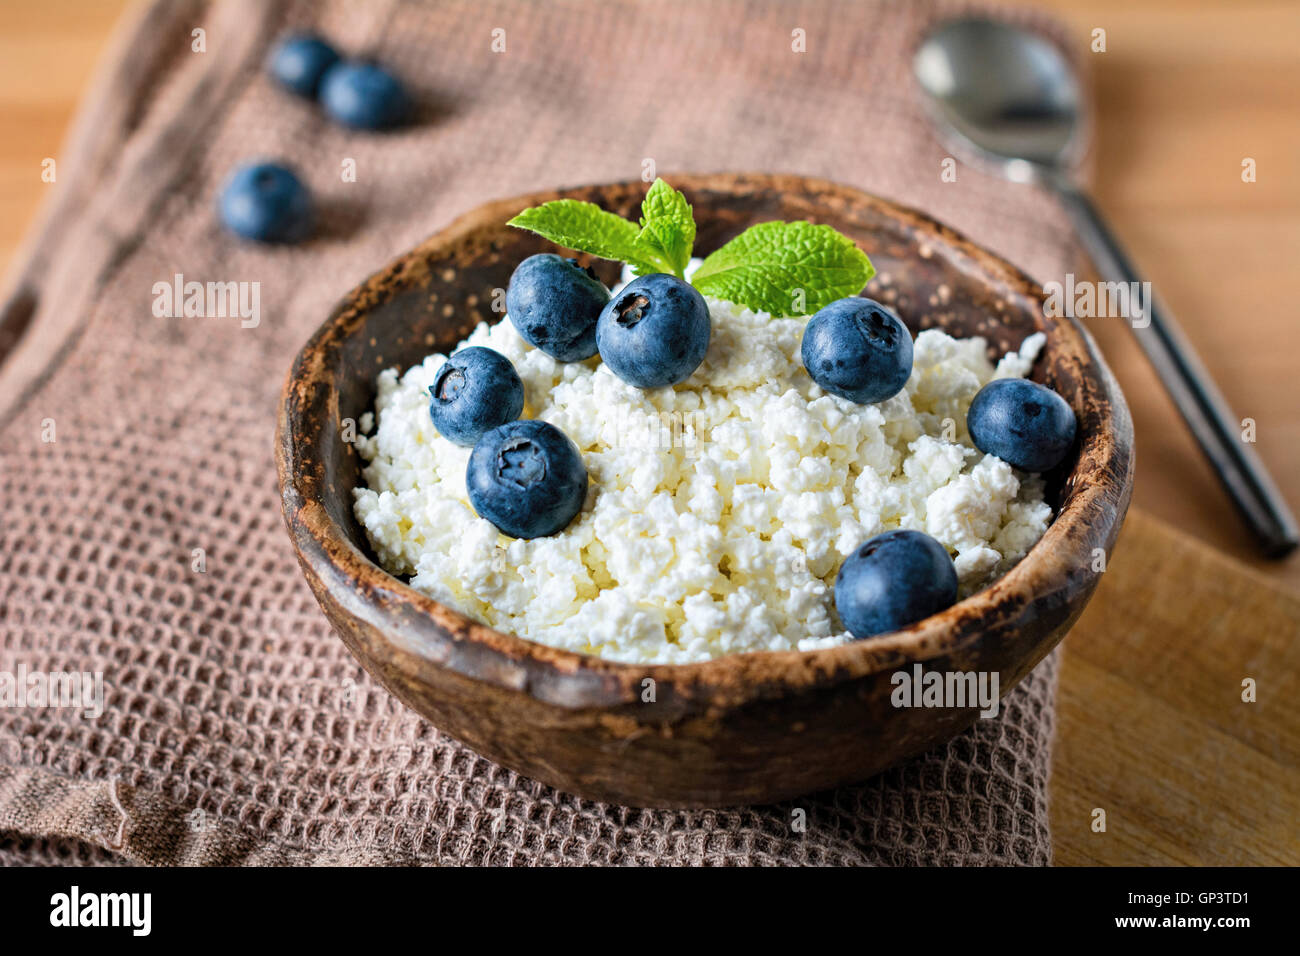 Farmers cheese, cottage cheese or quark - healthy homemade dairy product for breakfast. Topped with blueberries and mint leaf Stock Photo